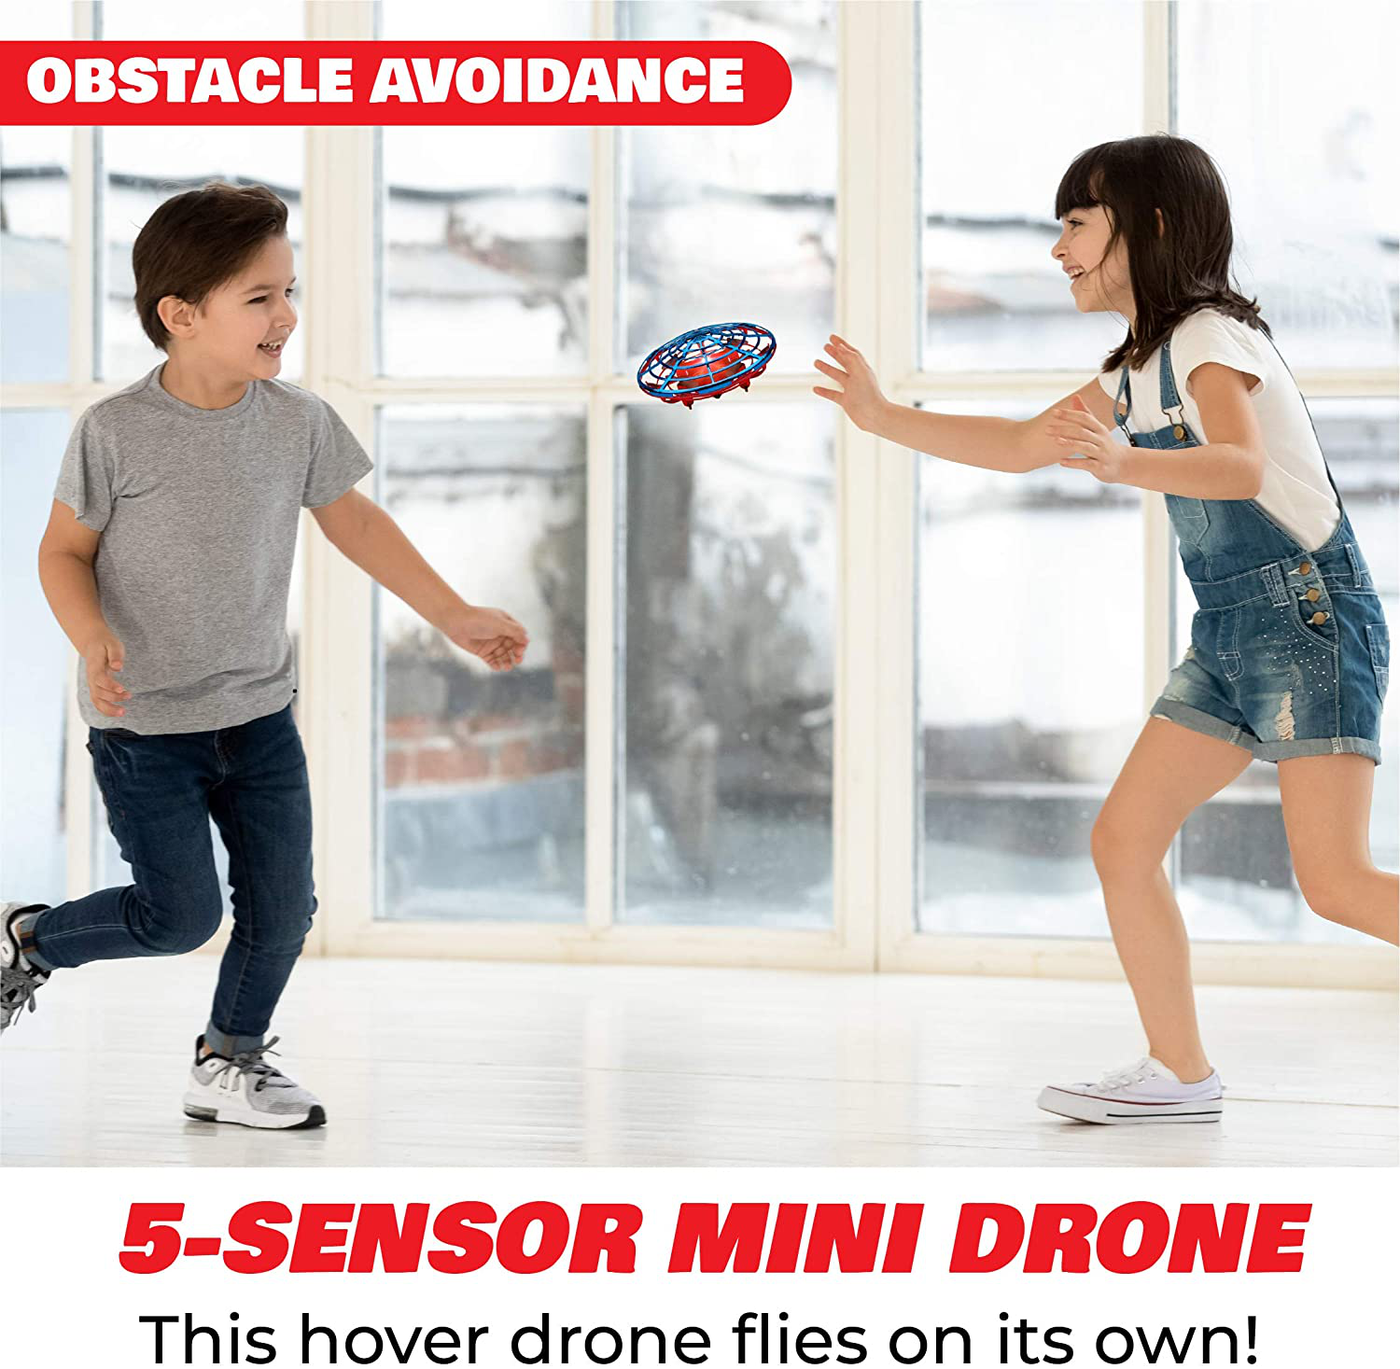 Force1 Scoot Combo Hand Operated Drone for Kids or Adults - Hands Free Motion Sensor Mini Drone, Easy Indoor Rechargeable UFO Flying Ball Drone Toy for Boys and Girls (Red/Blue)